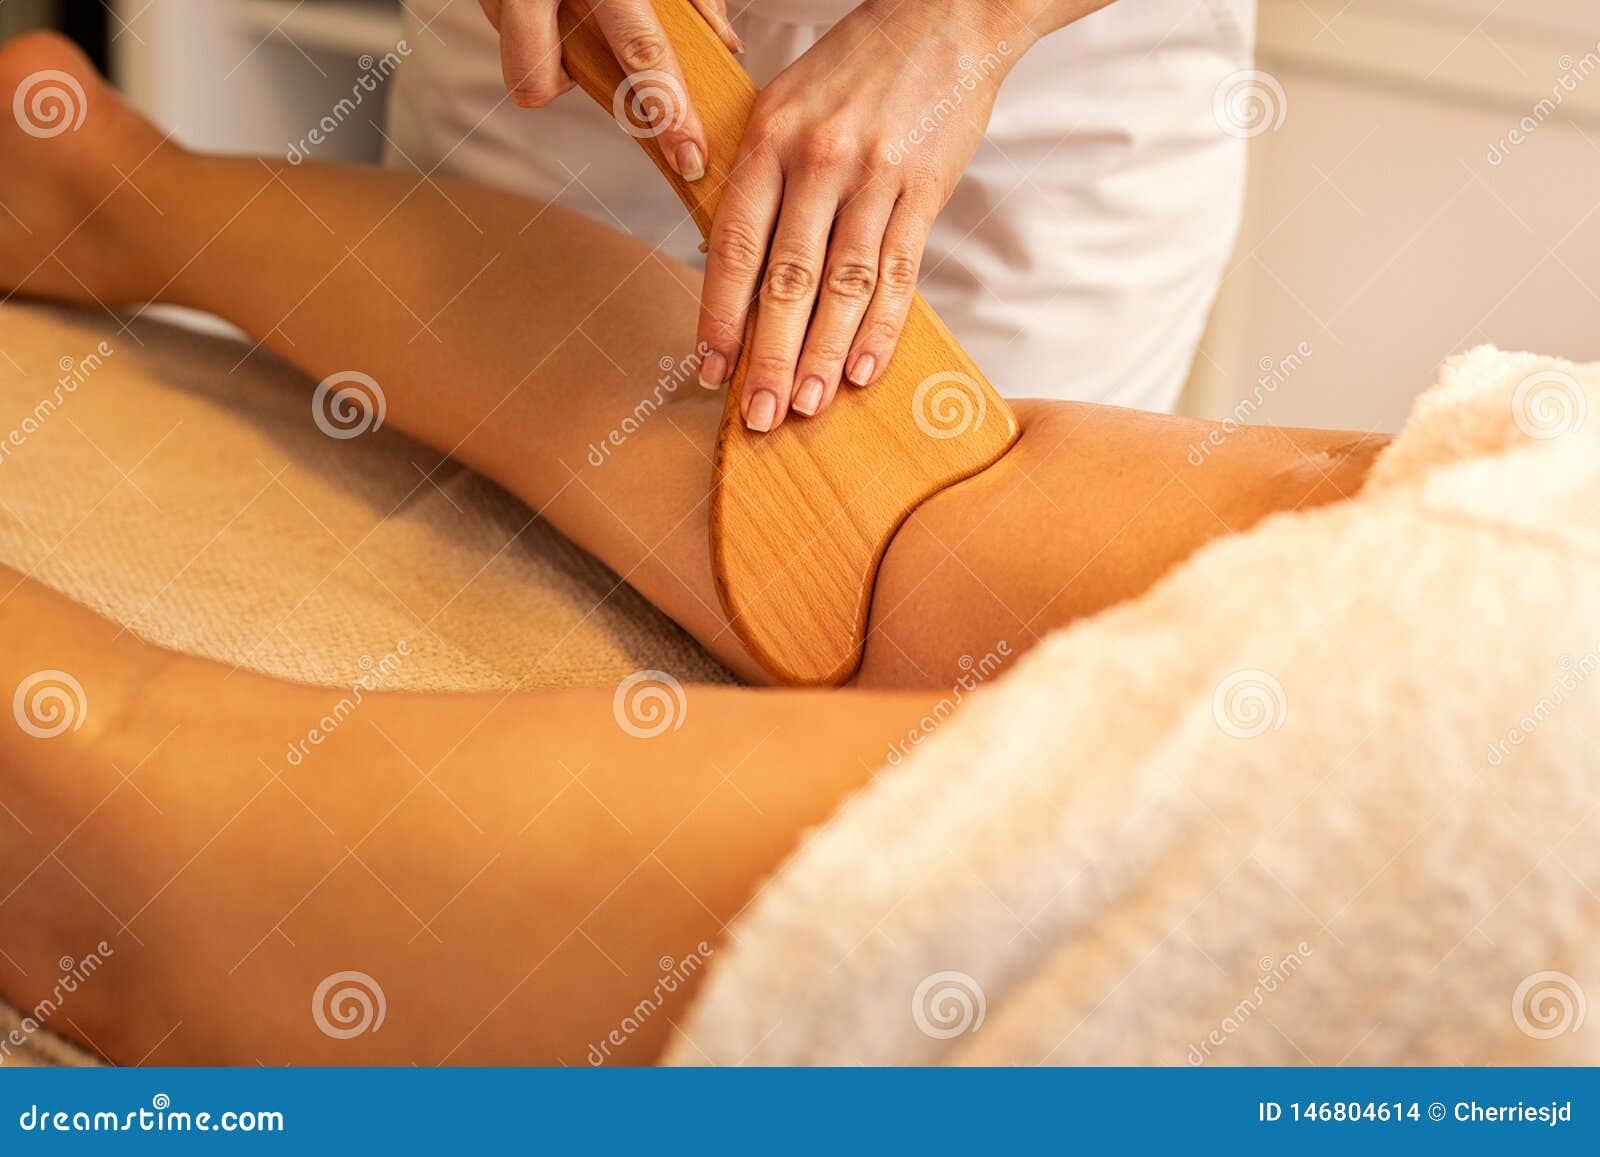 anti-cellulite madero therapy massage done with specially ed wooden tool